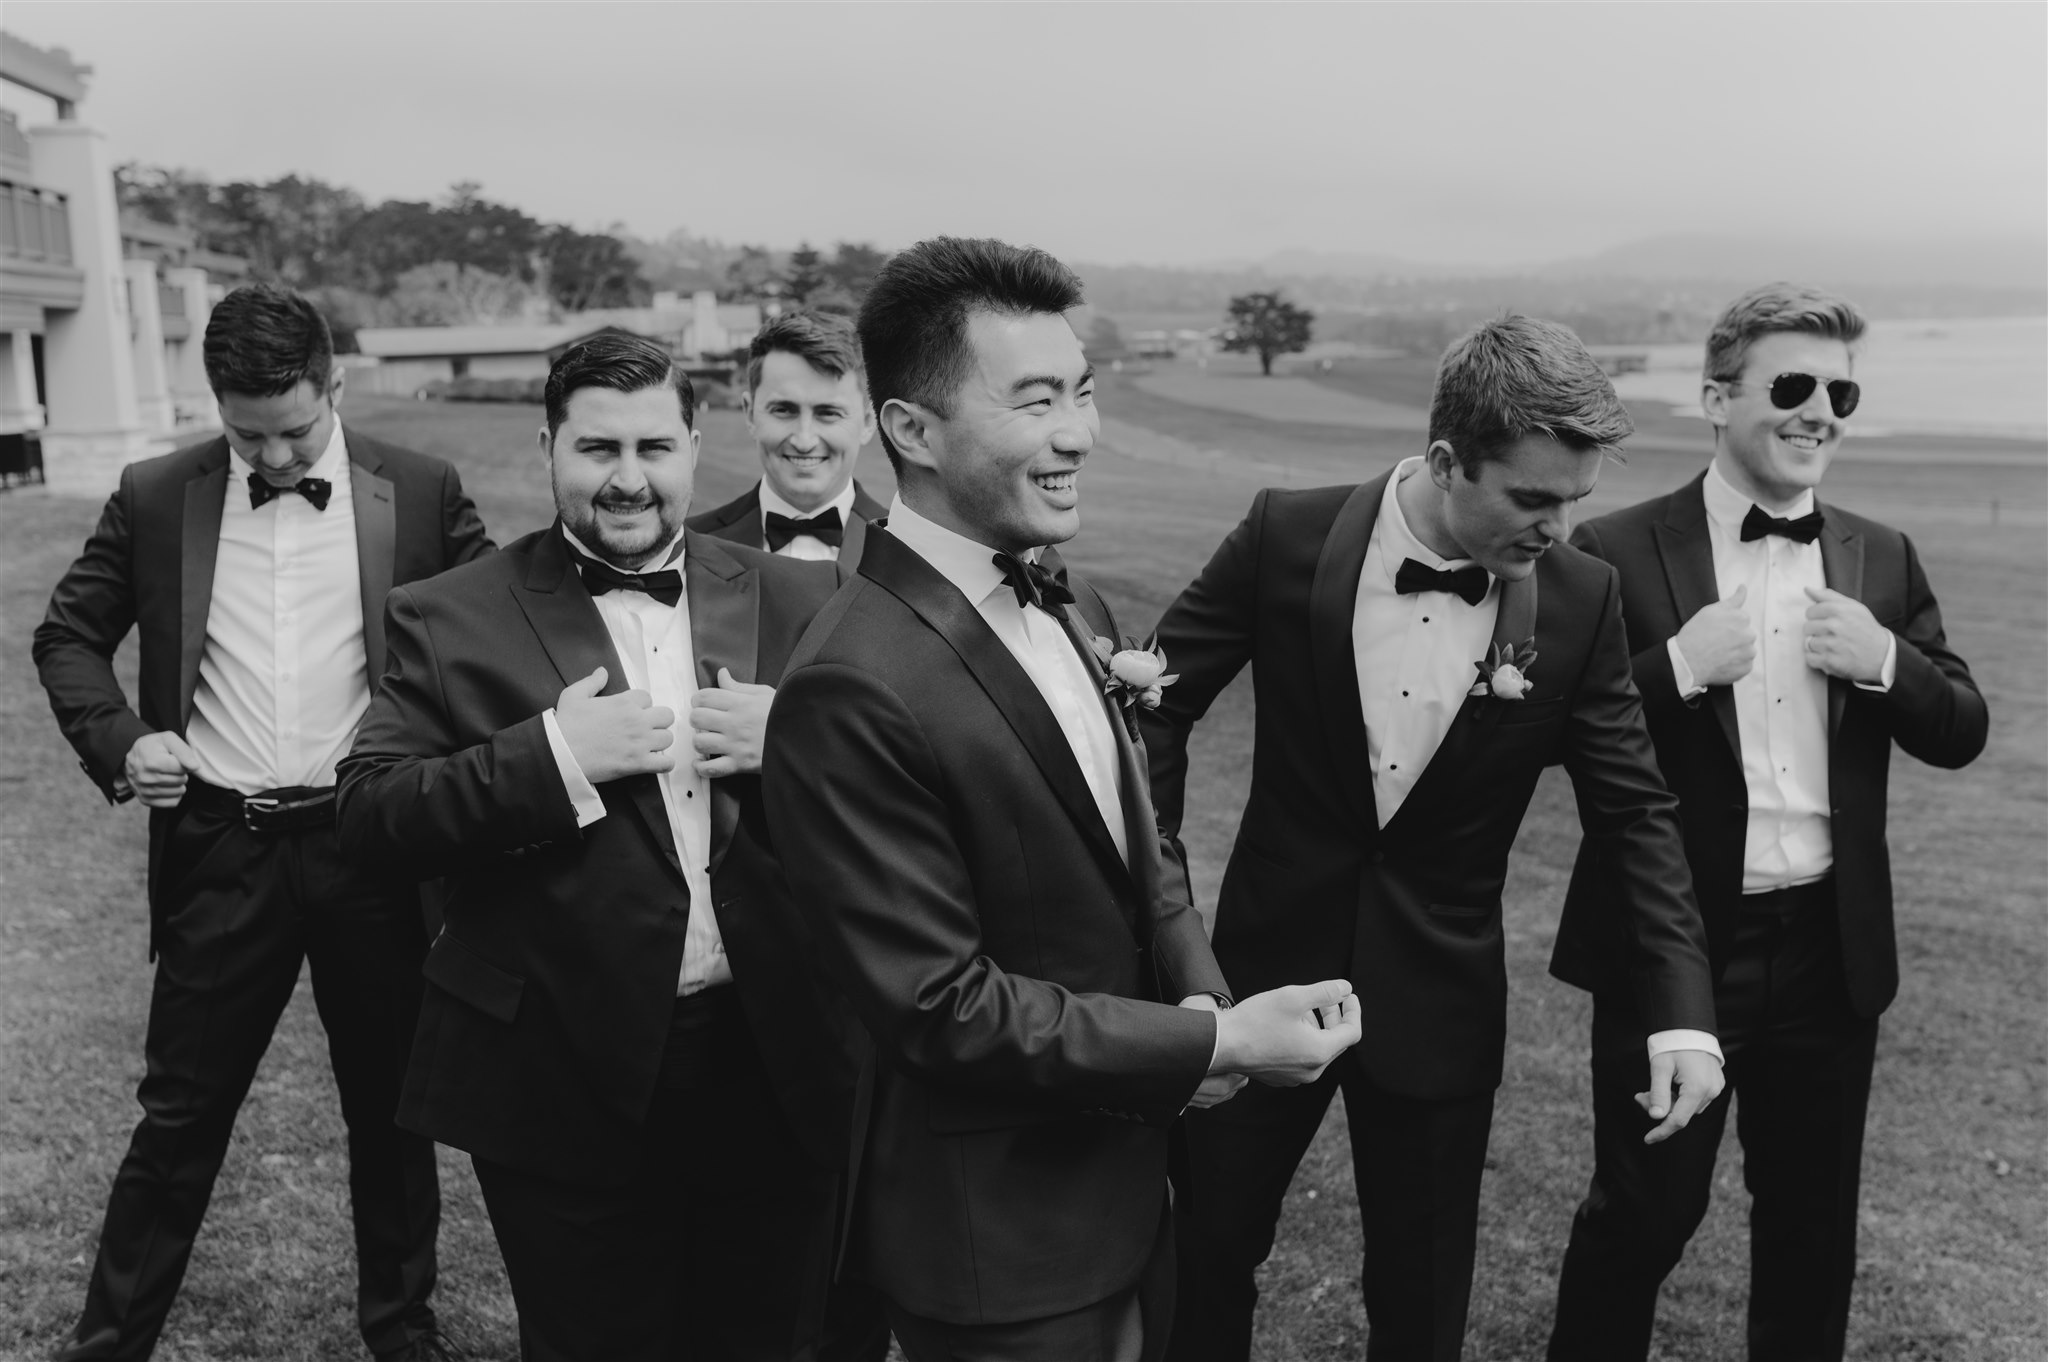 black and white groom portraits candid smiling beachside wedding carmel california black suits with black bowtie